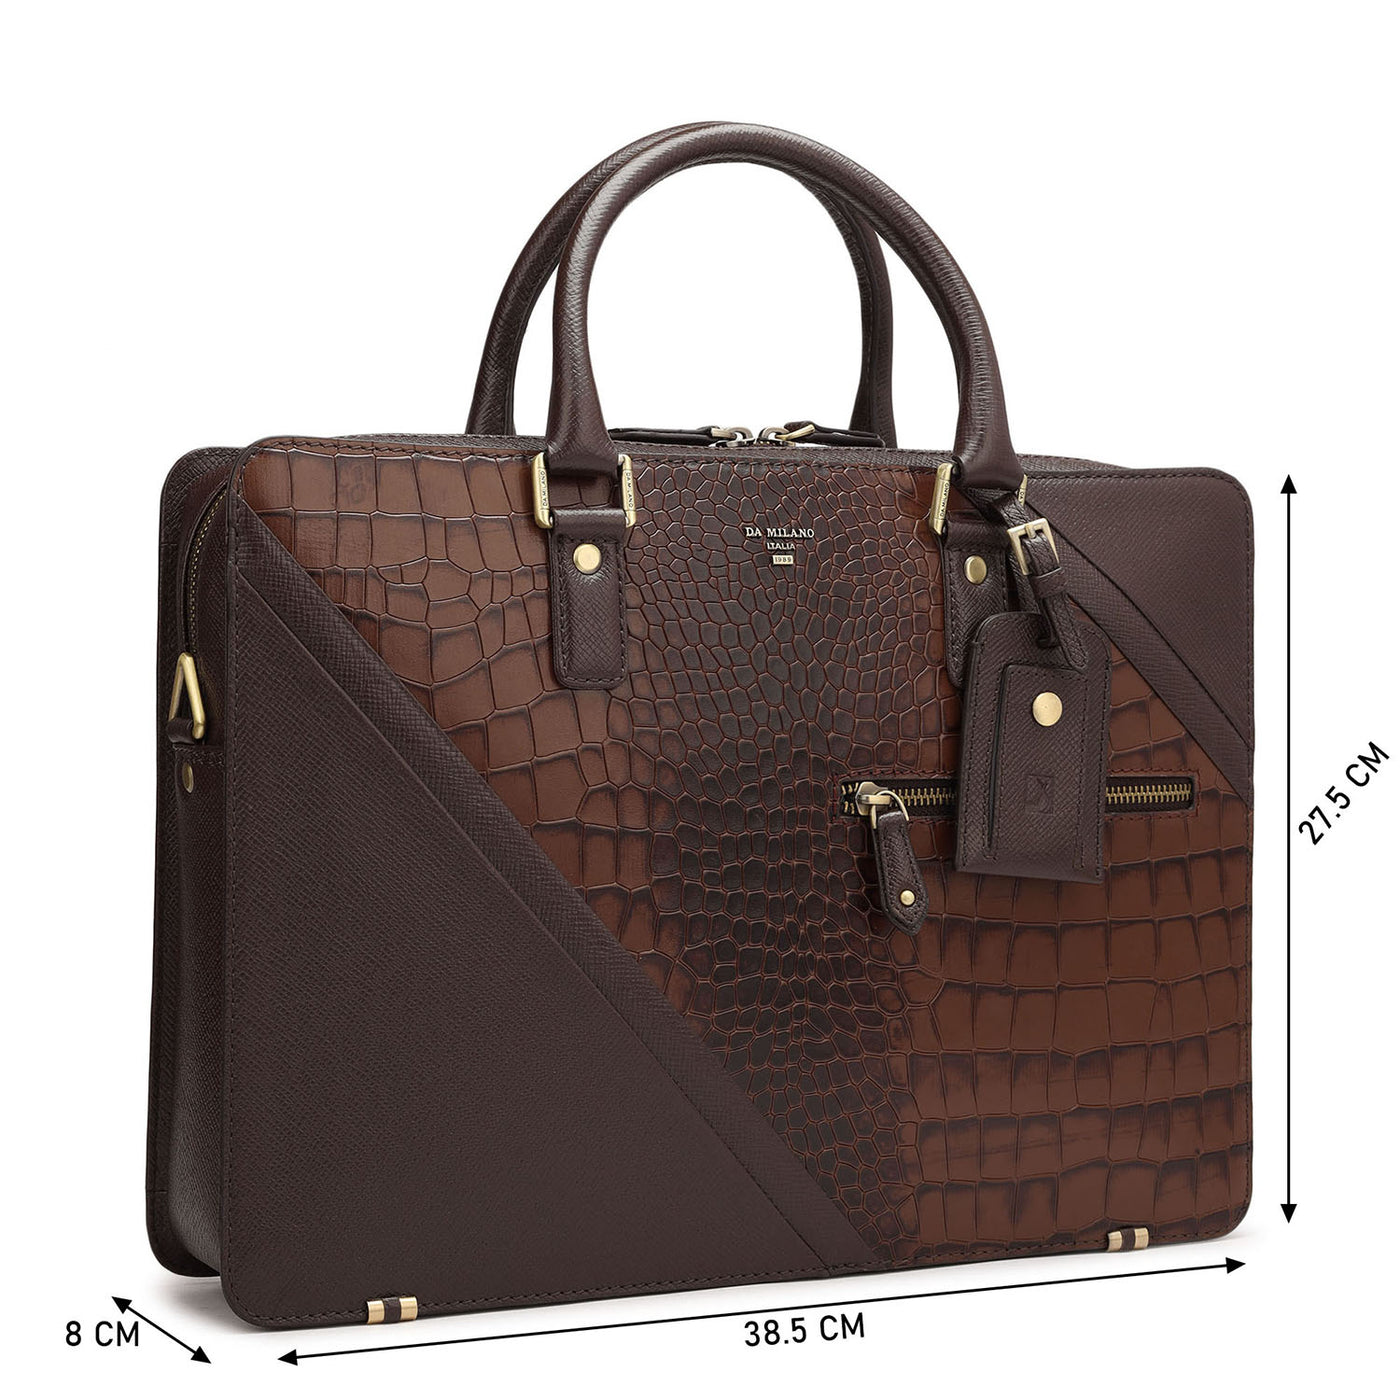 Brown Croco Franzy Leather Laptop Bag - Upto 15"